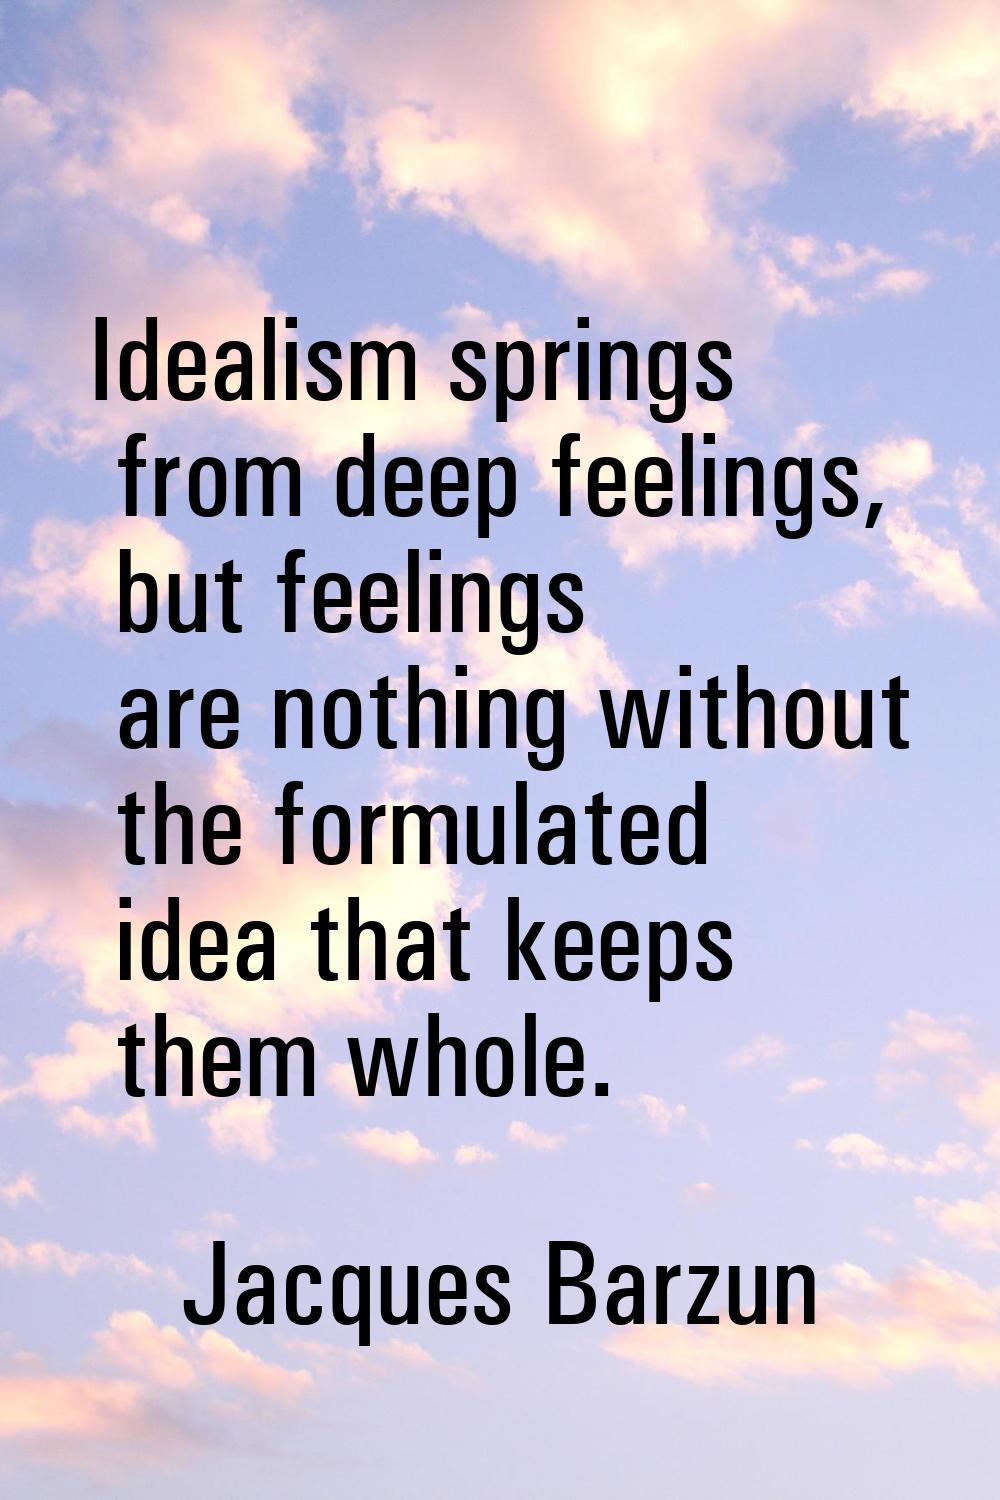 Idealism springs from deep feelings, but feelings are nothing without the formulated idea that keep